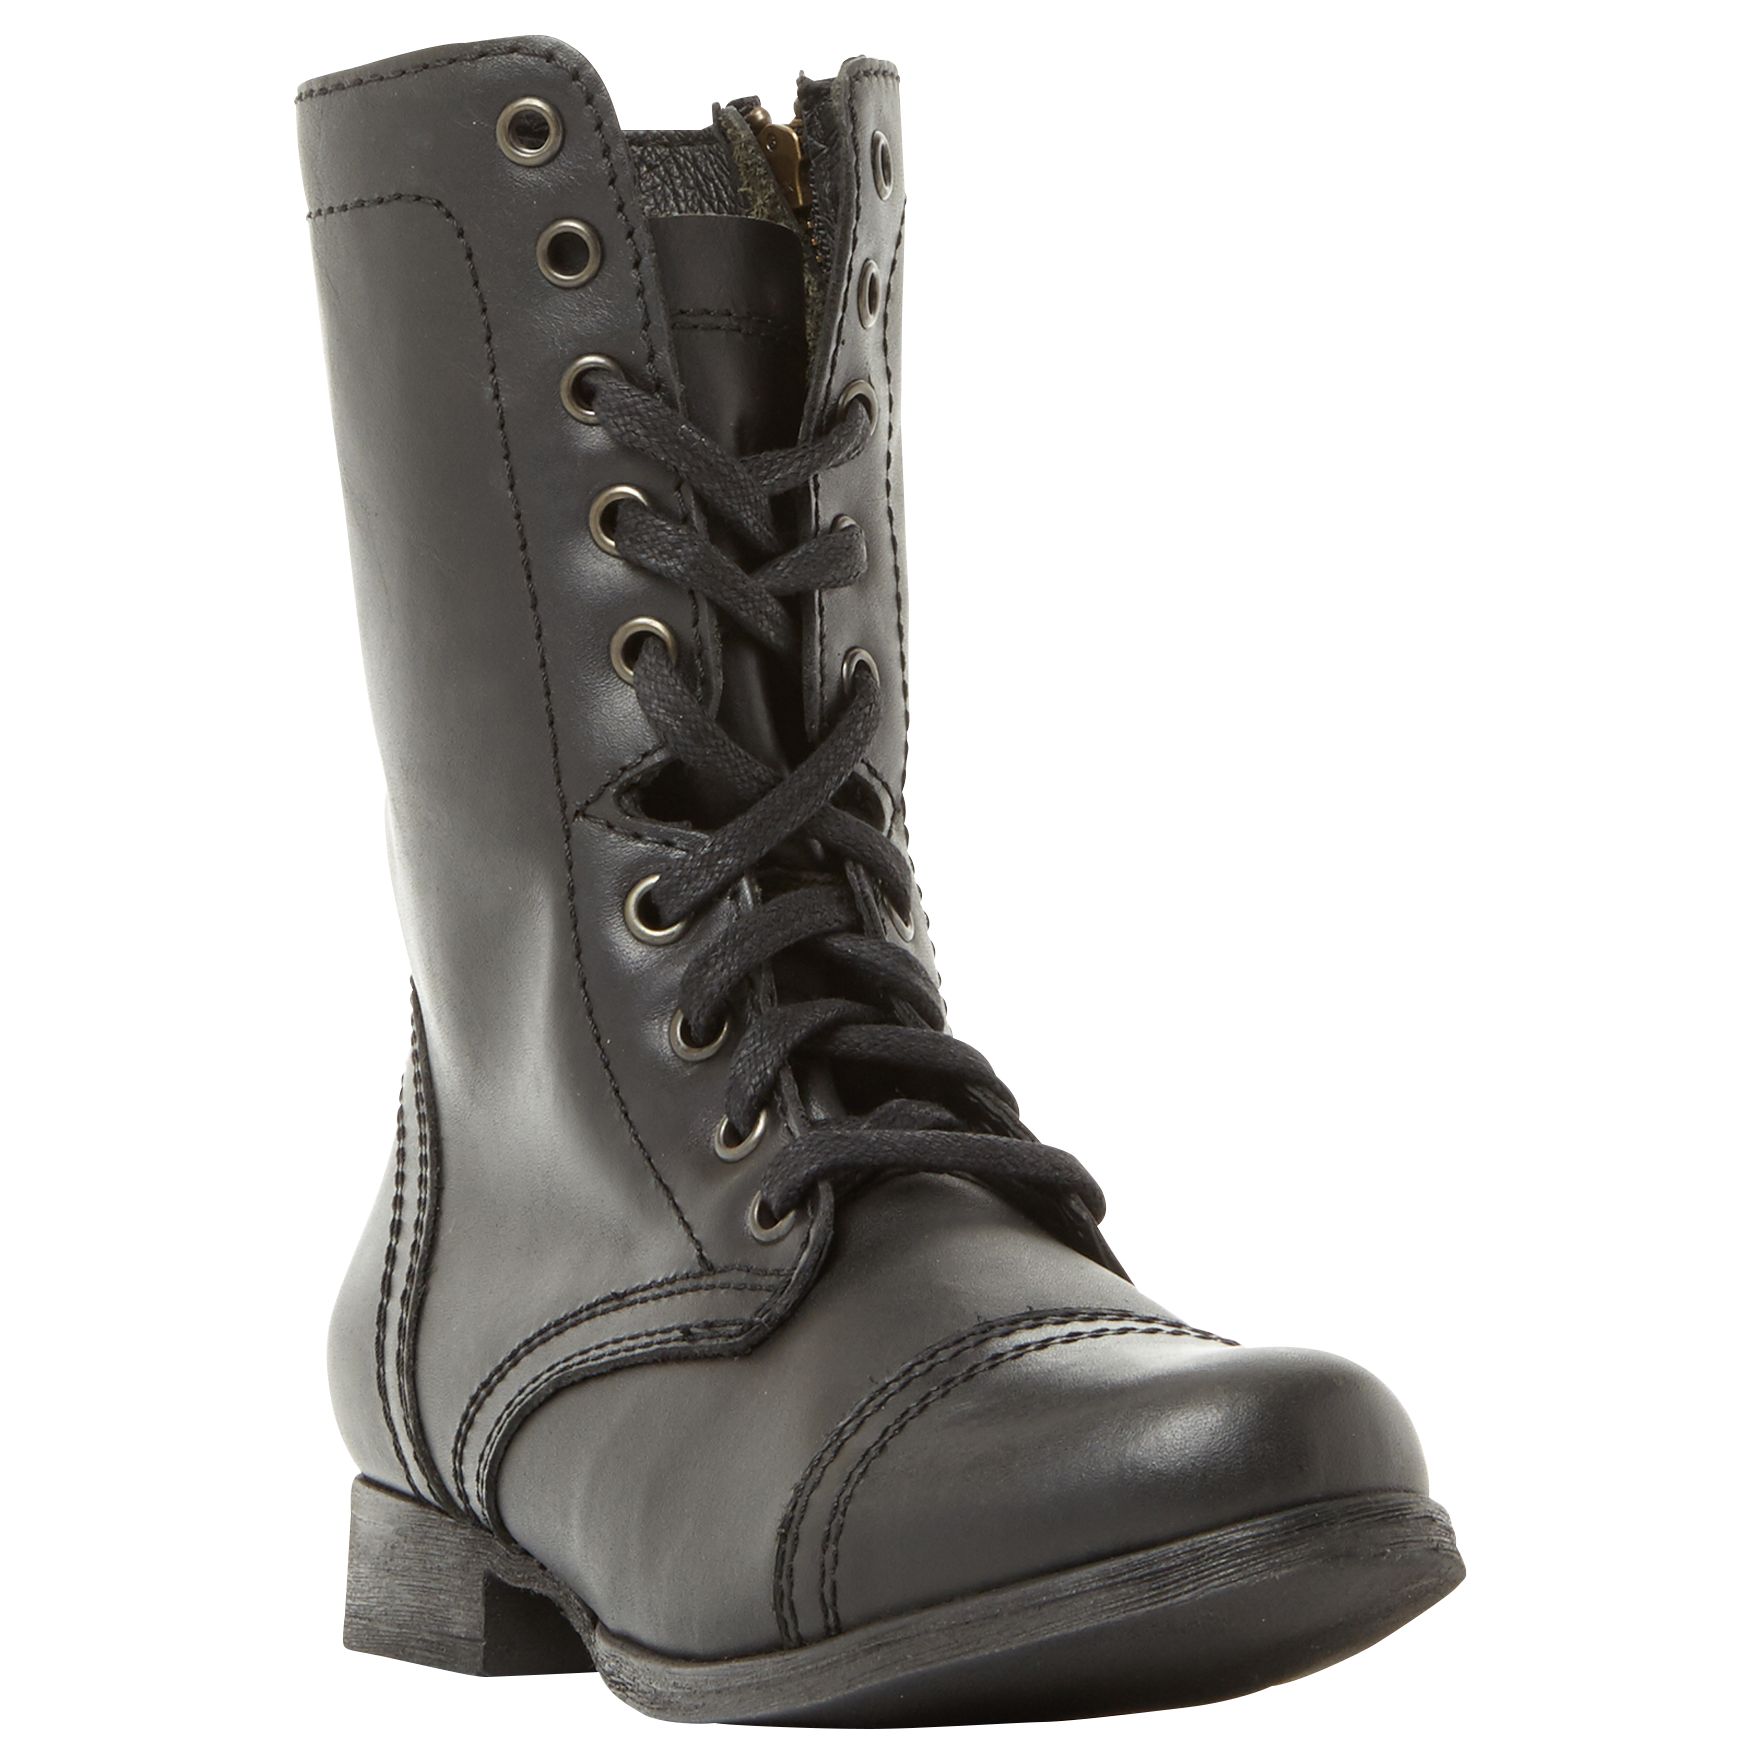 Steve Madden Troopa Lace Up Boots, Black, 8